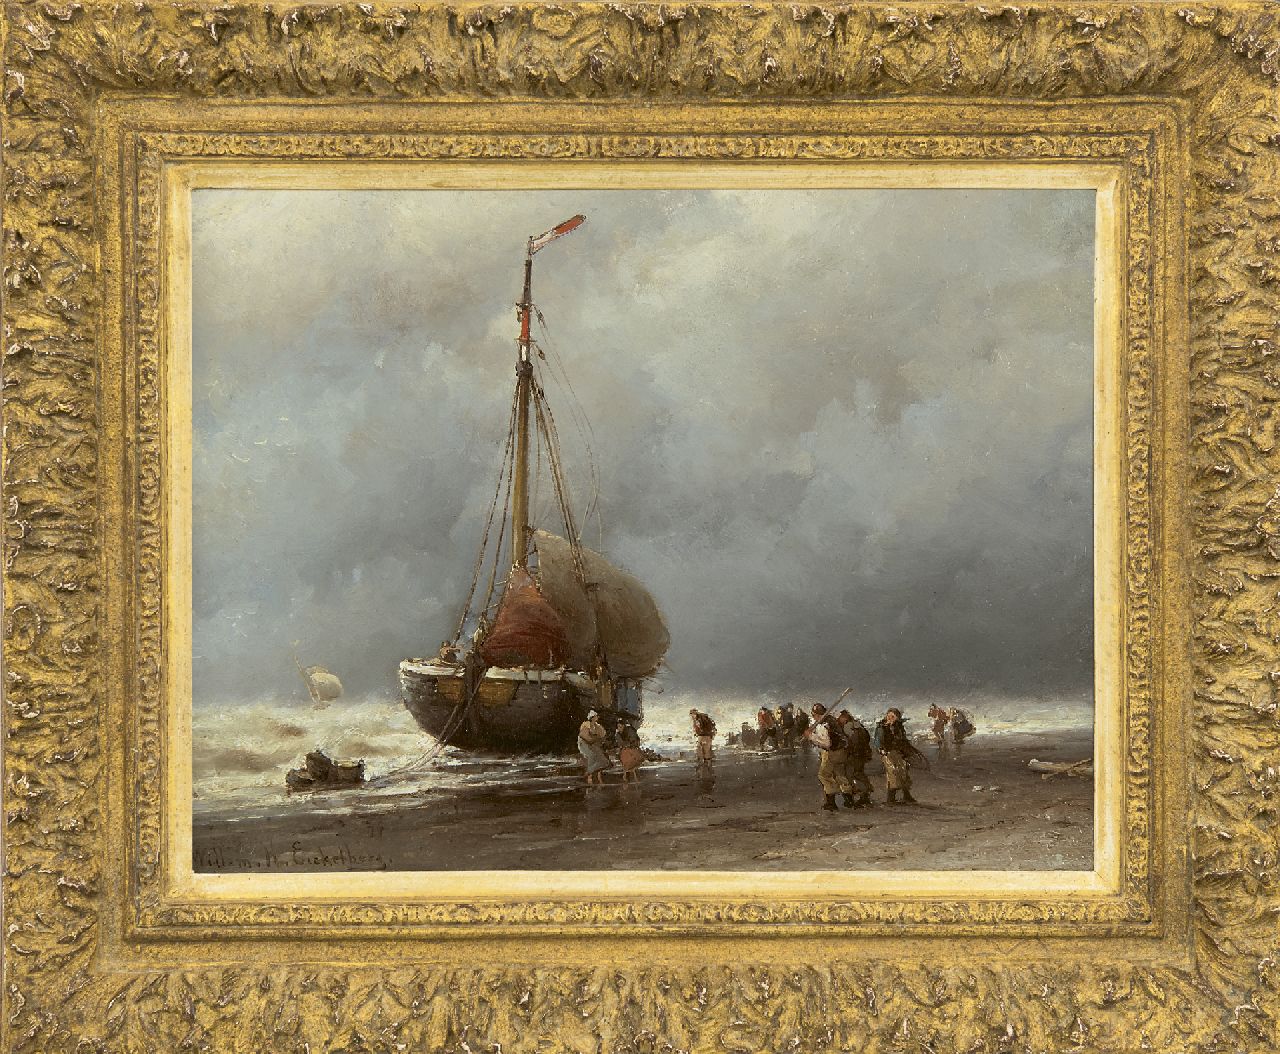 Eickelberg W.H.  | Willem Hendrik Eickelberg | Paintings offered for sale | Bringing in the catch in a storm, oil on panel 26.8 x 35.0 cm, signed l.l.